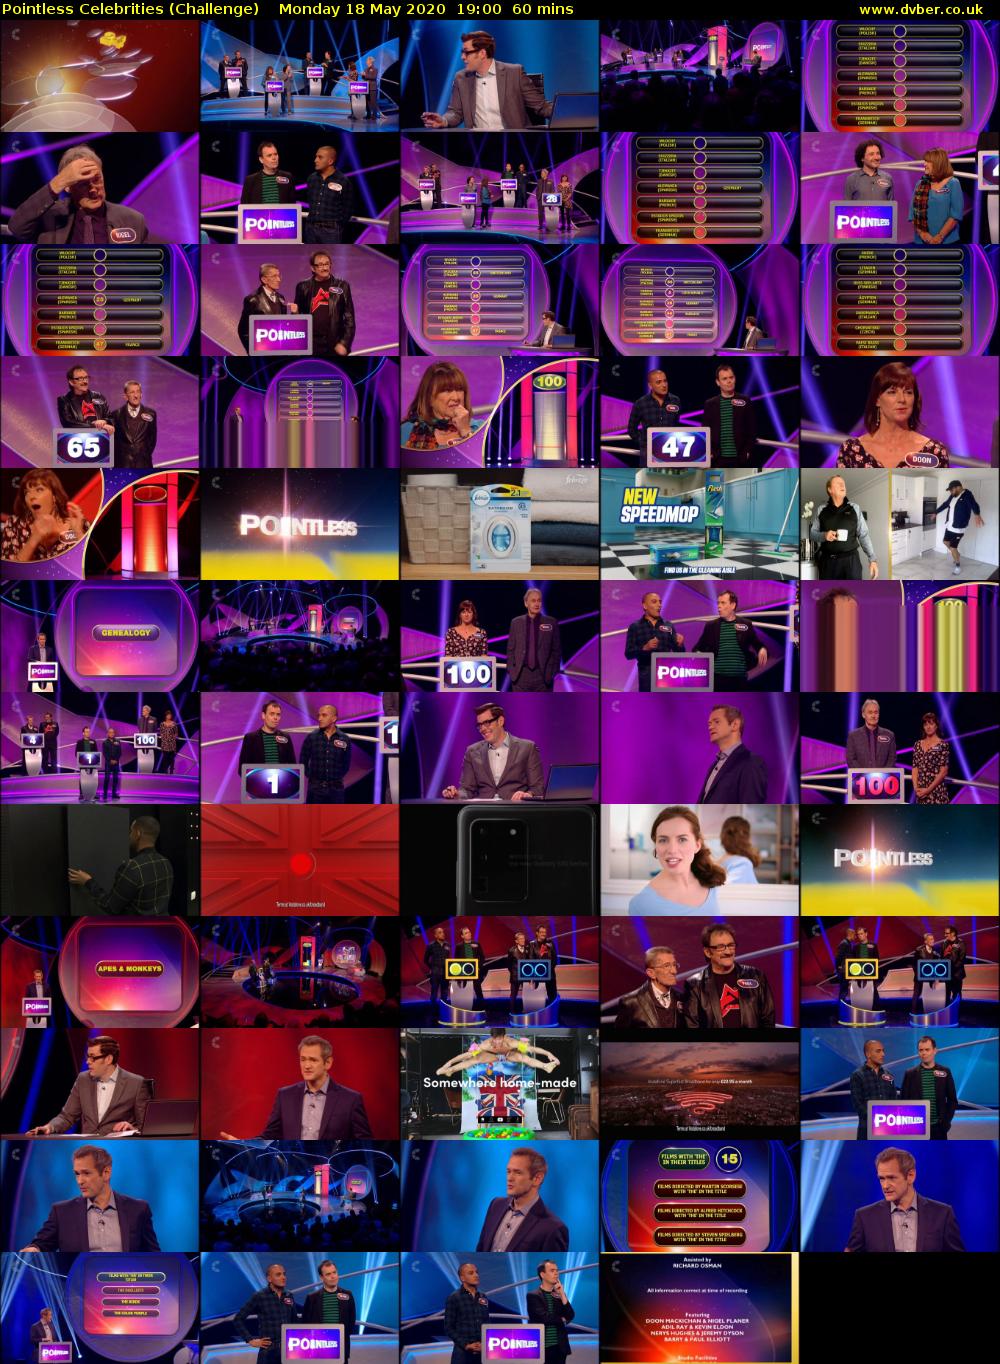 Pointless Celebrities (Challenge) Monday 18 May 2020 19:00 - 20:00